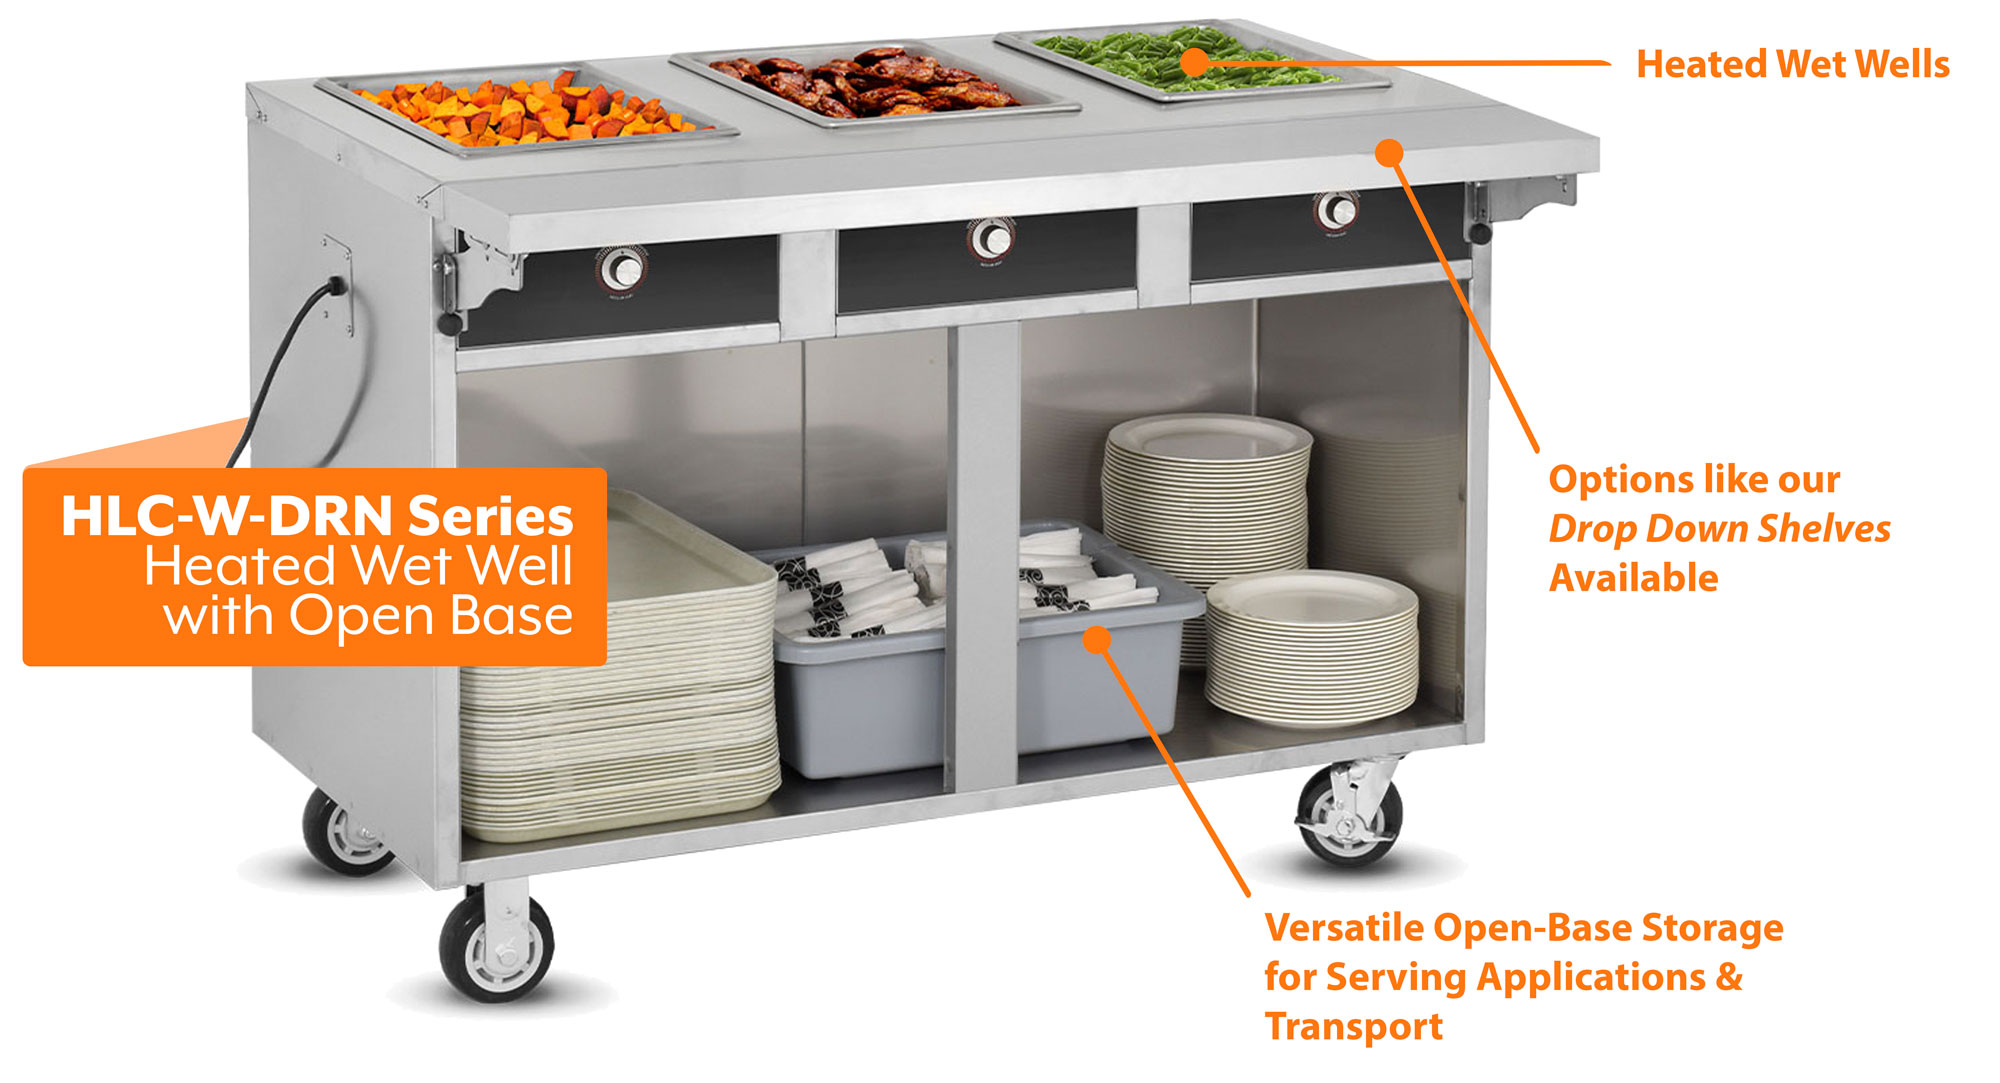 HLC-W-DRN Series: Heated Wet Serving Well with Open Base Storage Below